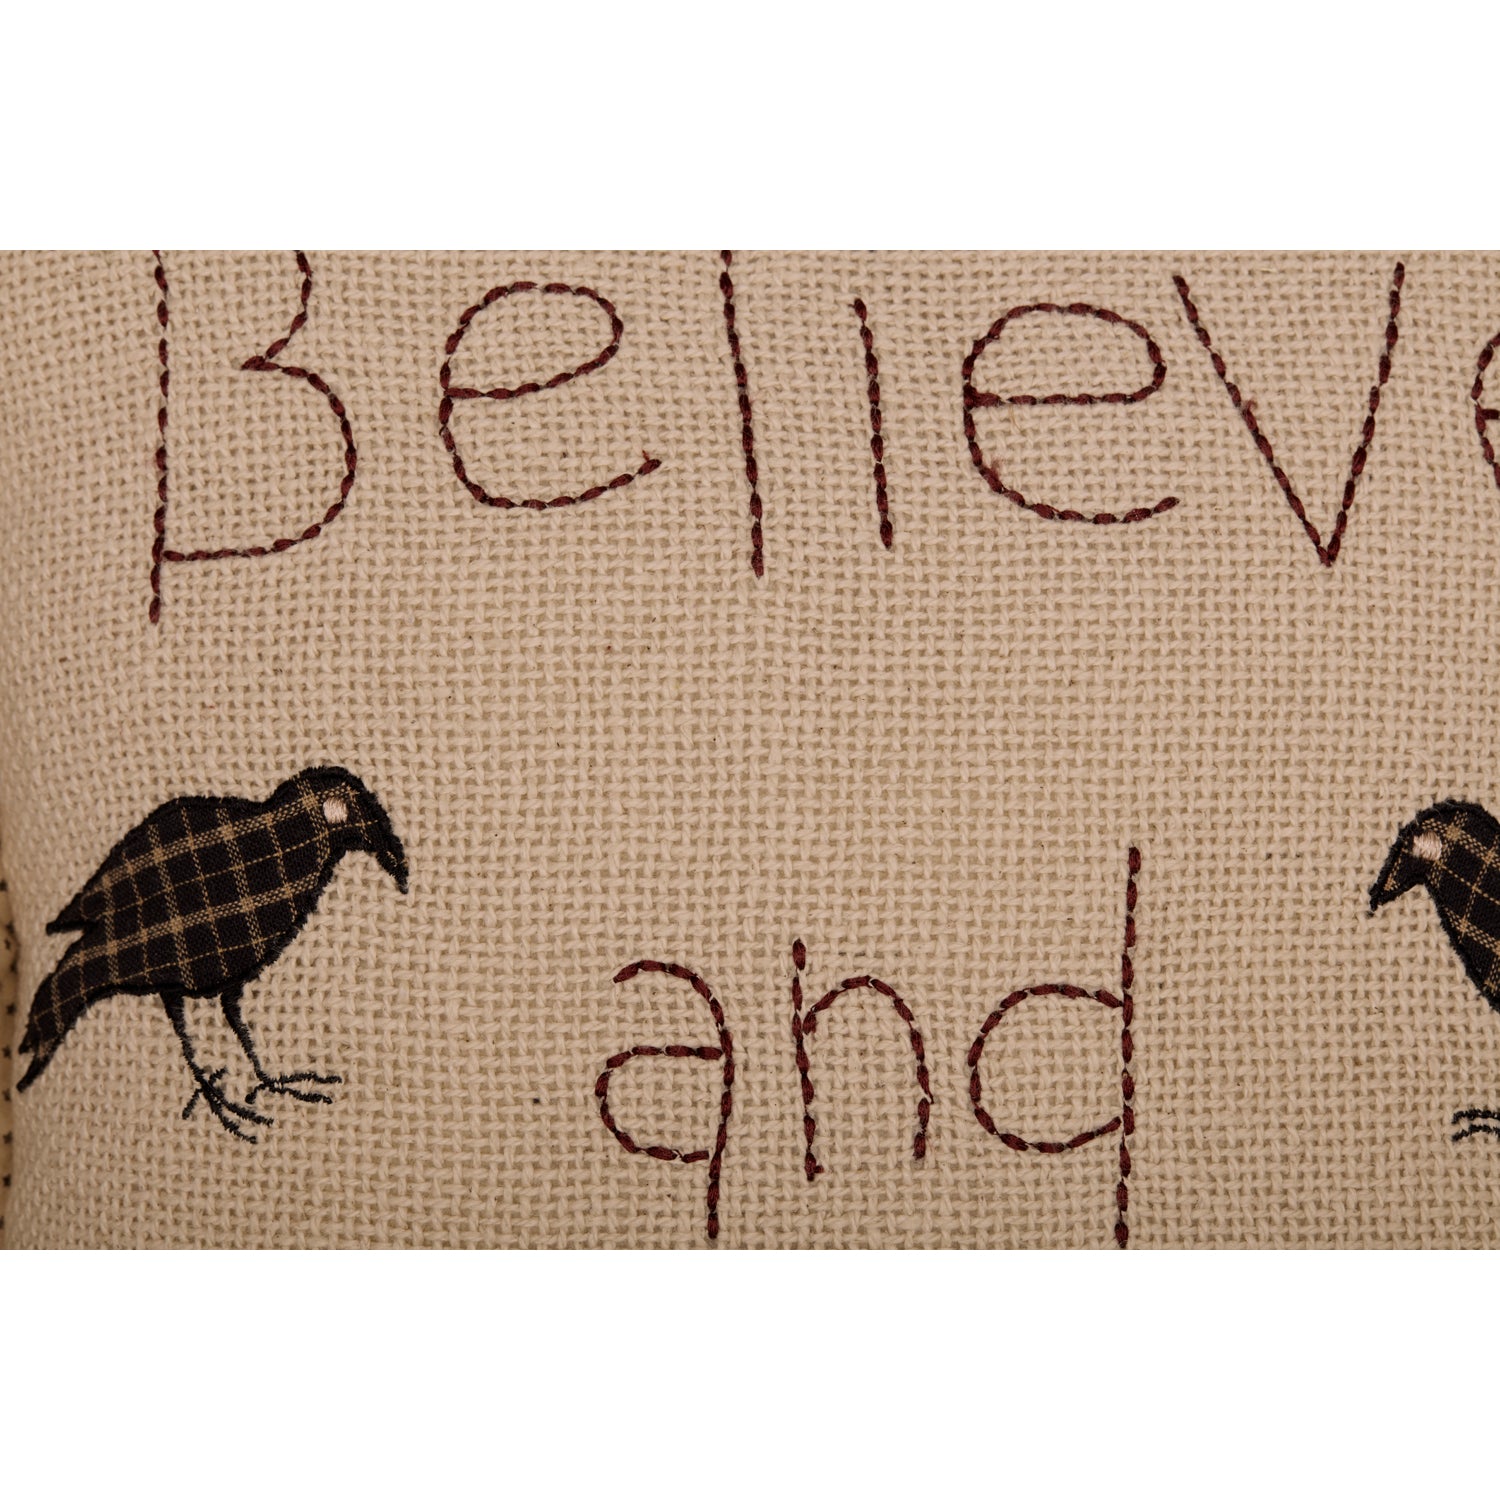 54618-Kettle-Grove-Believe-and-Receive-Pillow-12x12-image-6